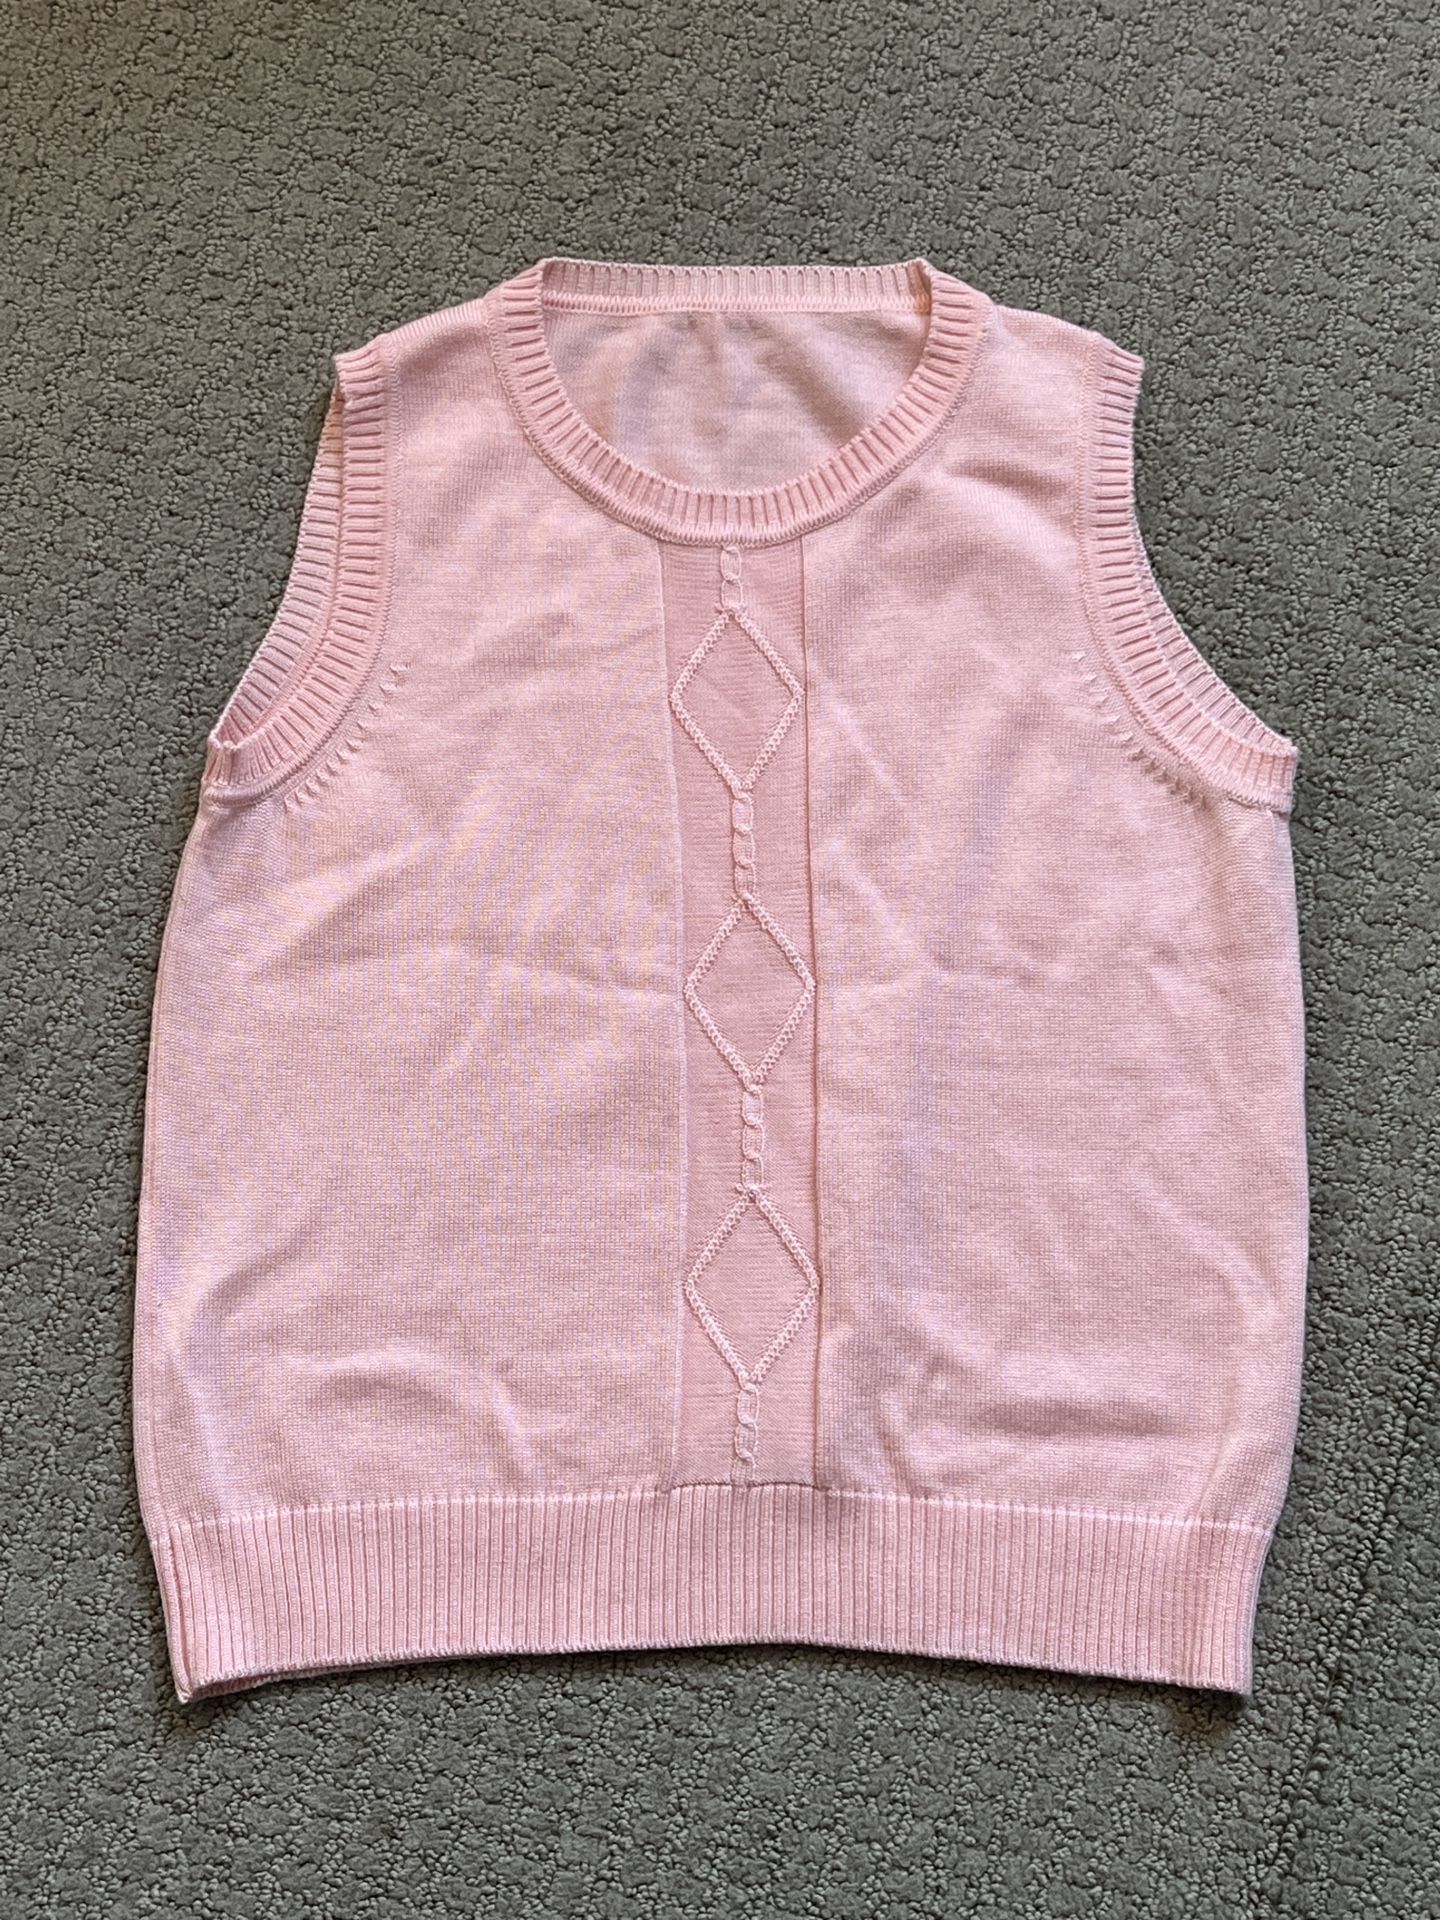 Girls Sweater Vests Size 7/8